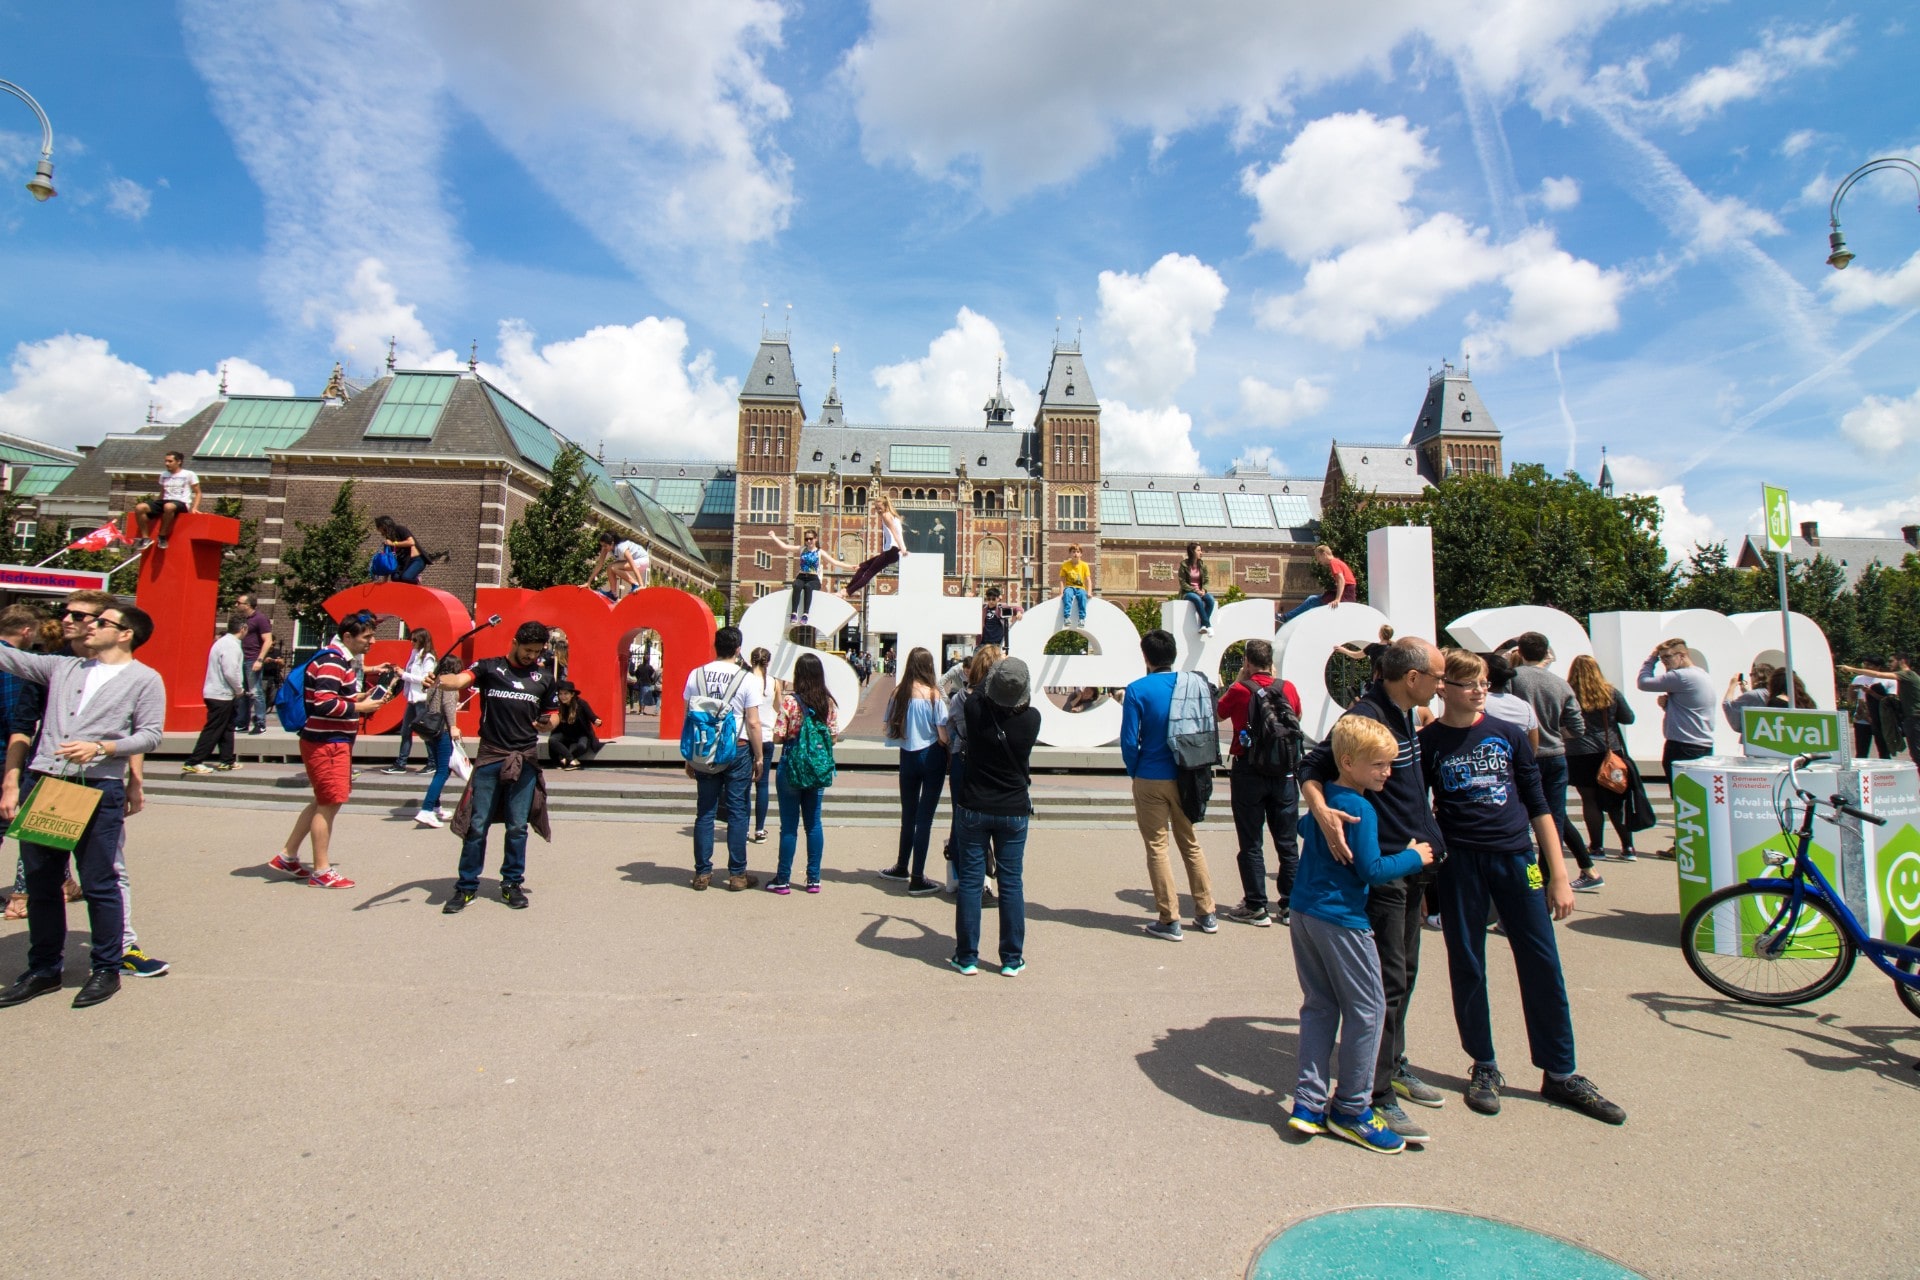 tourists-standing-in-front-of-iamsterdam-sign-a-famous-tourist-attraction-2-day-amsterdam-itinerary